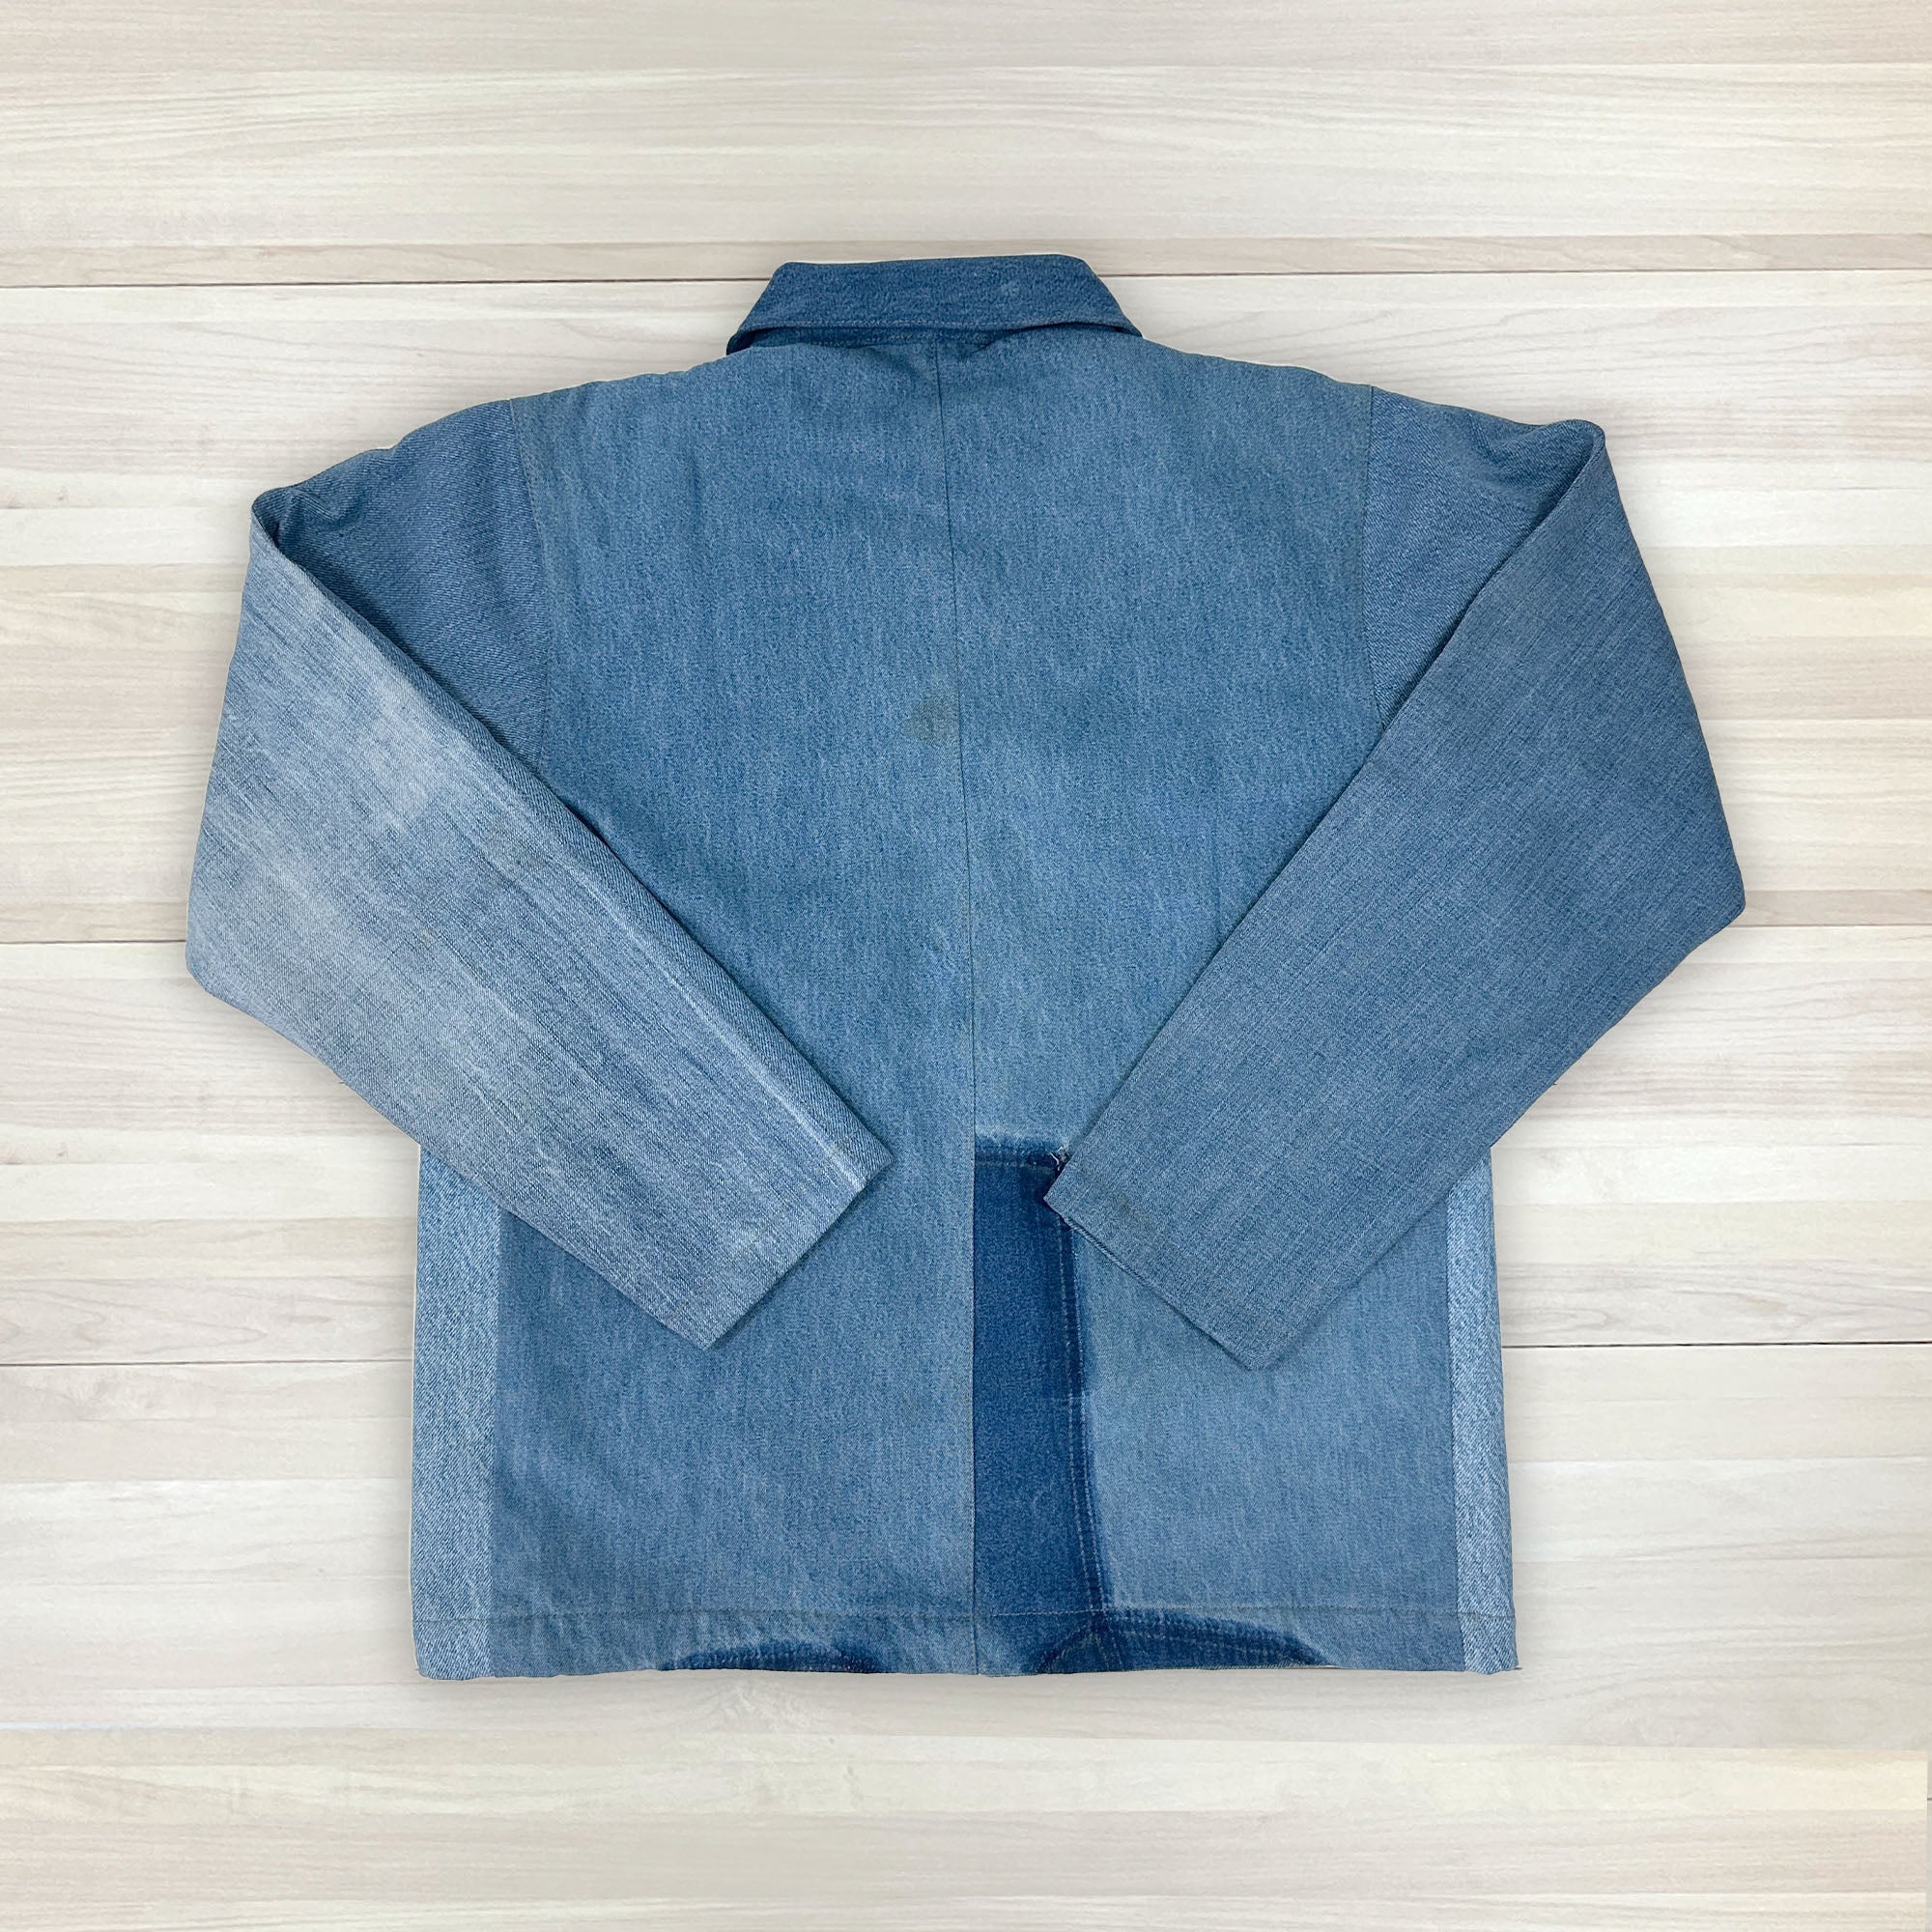 Chore Coat Made From Recycled Carhartt Work Jeans - Small-4